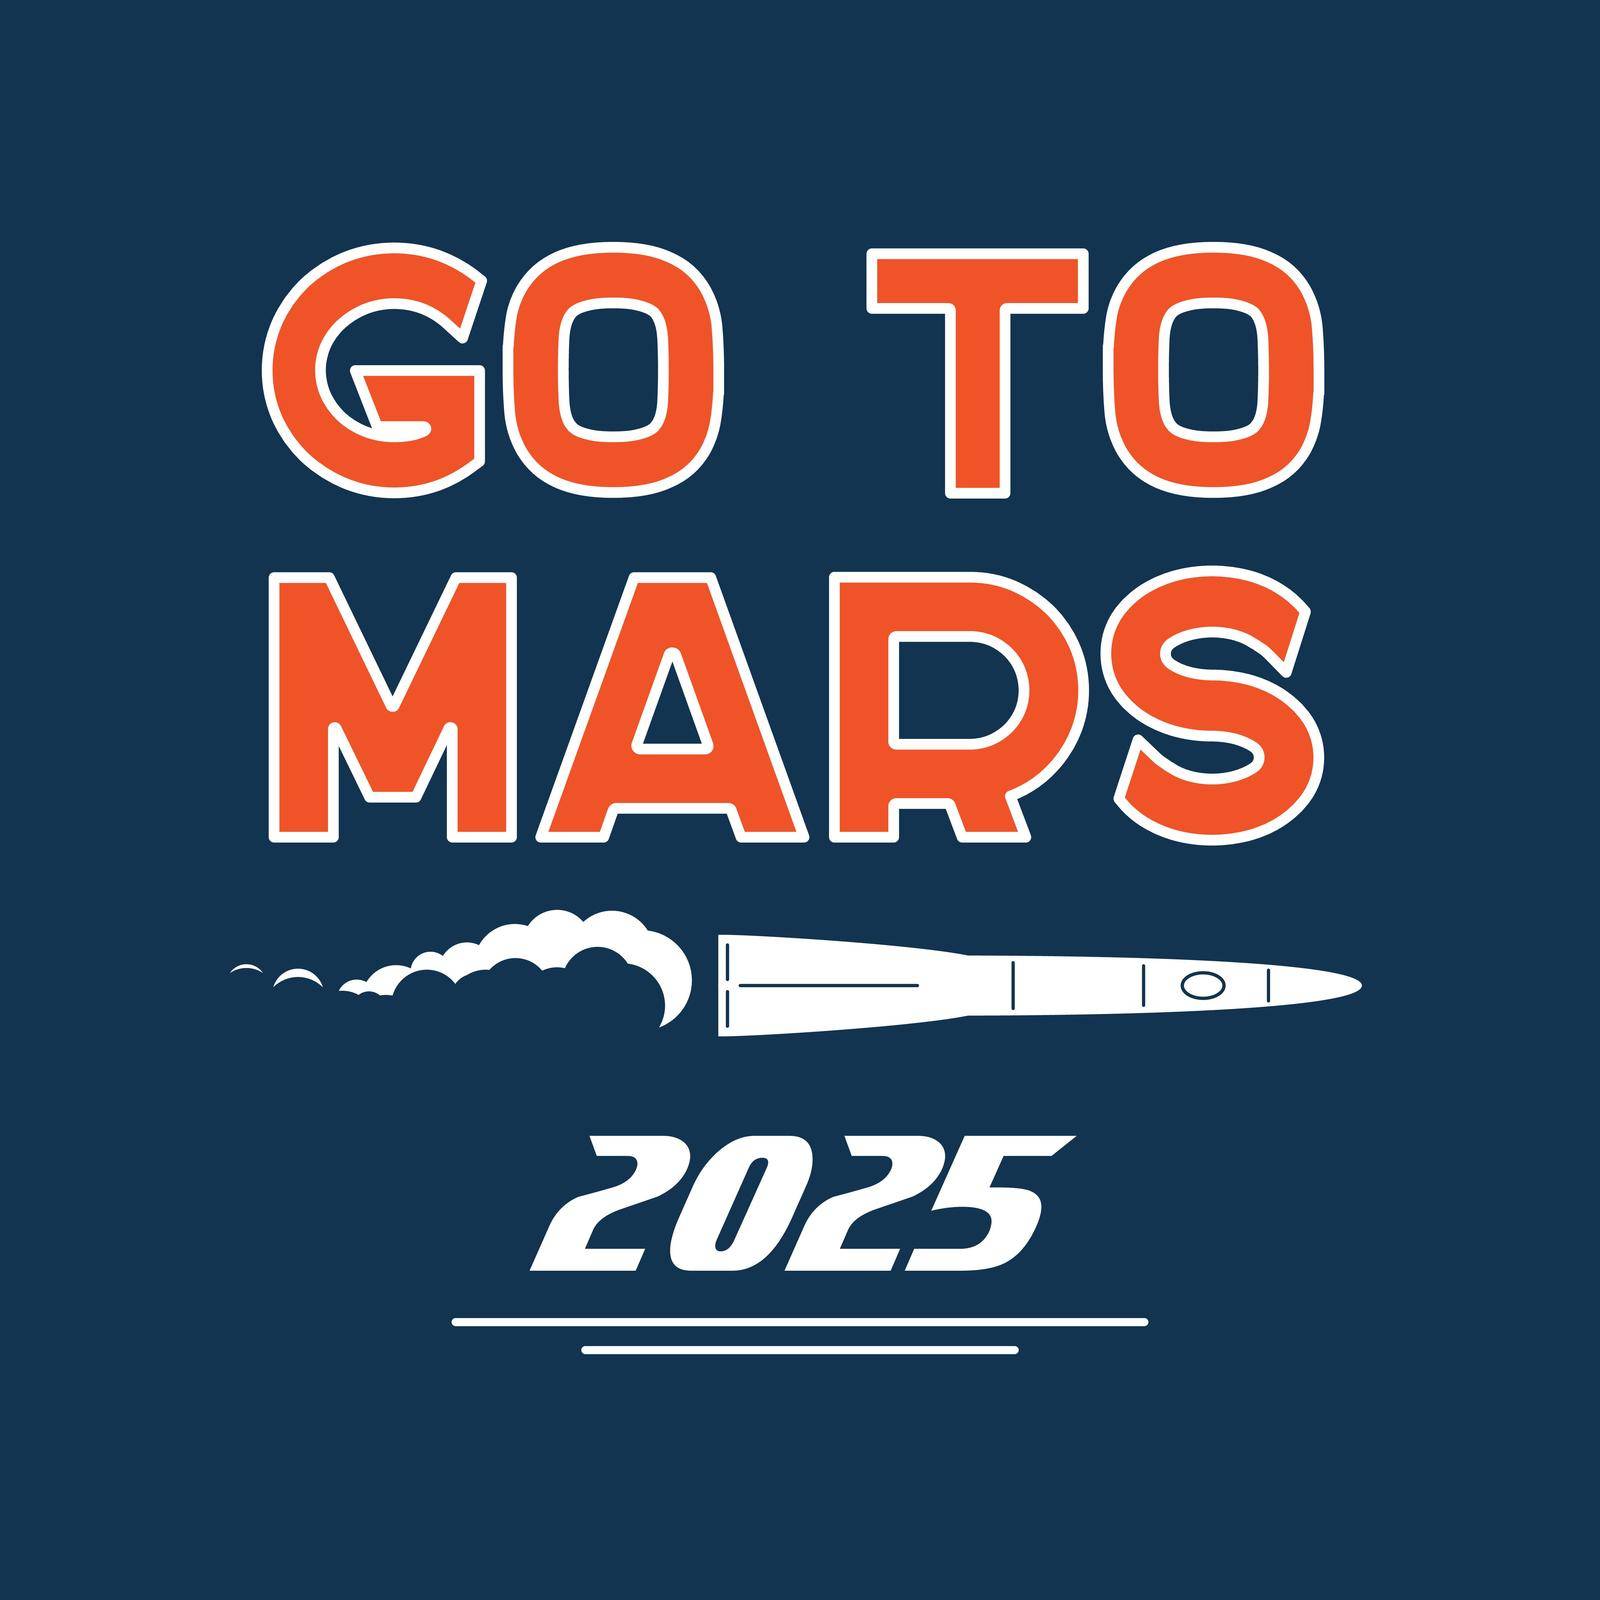 Cartoon poster with Go to Mars typography. Vector background for Mars mission, exploration, promo events, games or books